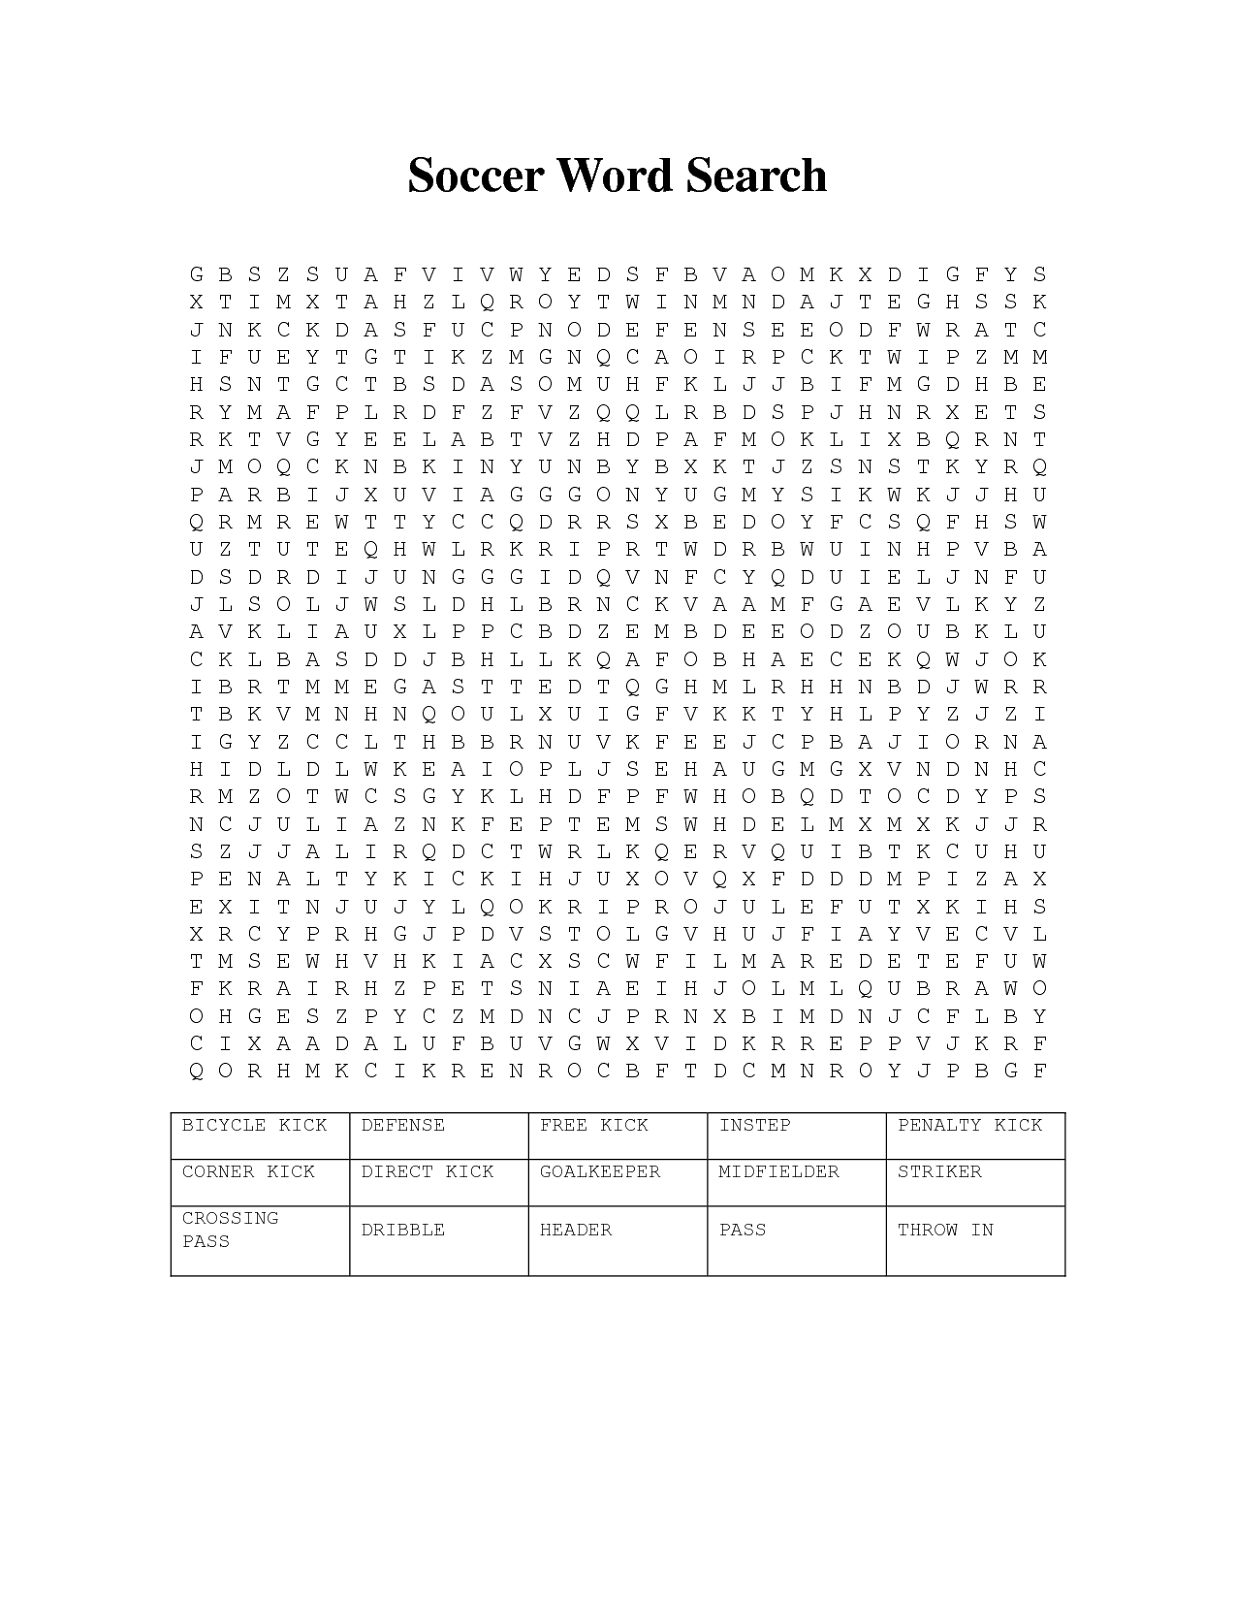 soccer-word-search-free